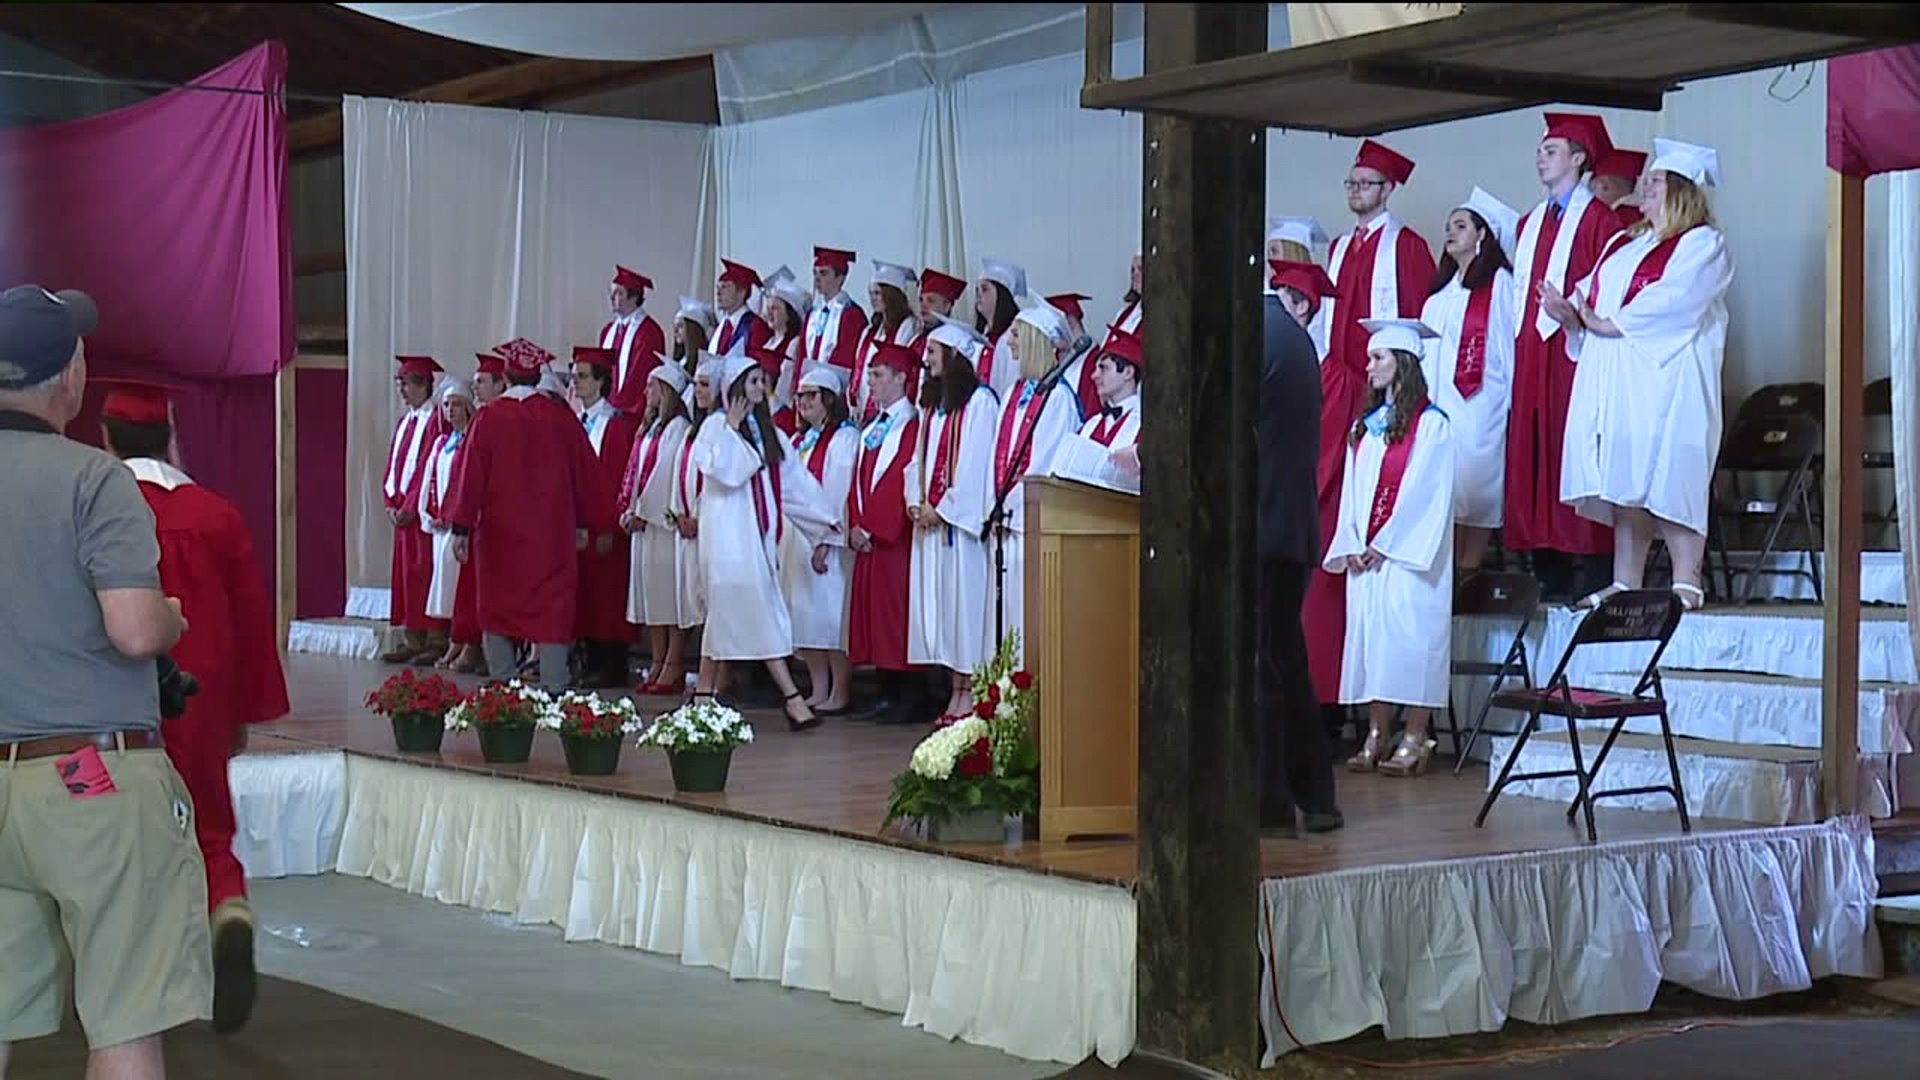 Sullivan County High School Graduation Held at County Fairgrounds After Fire